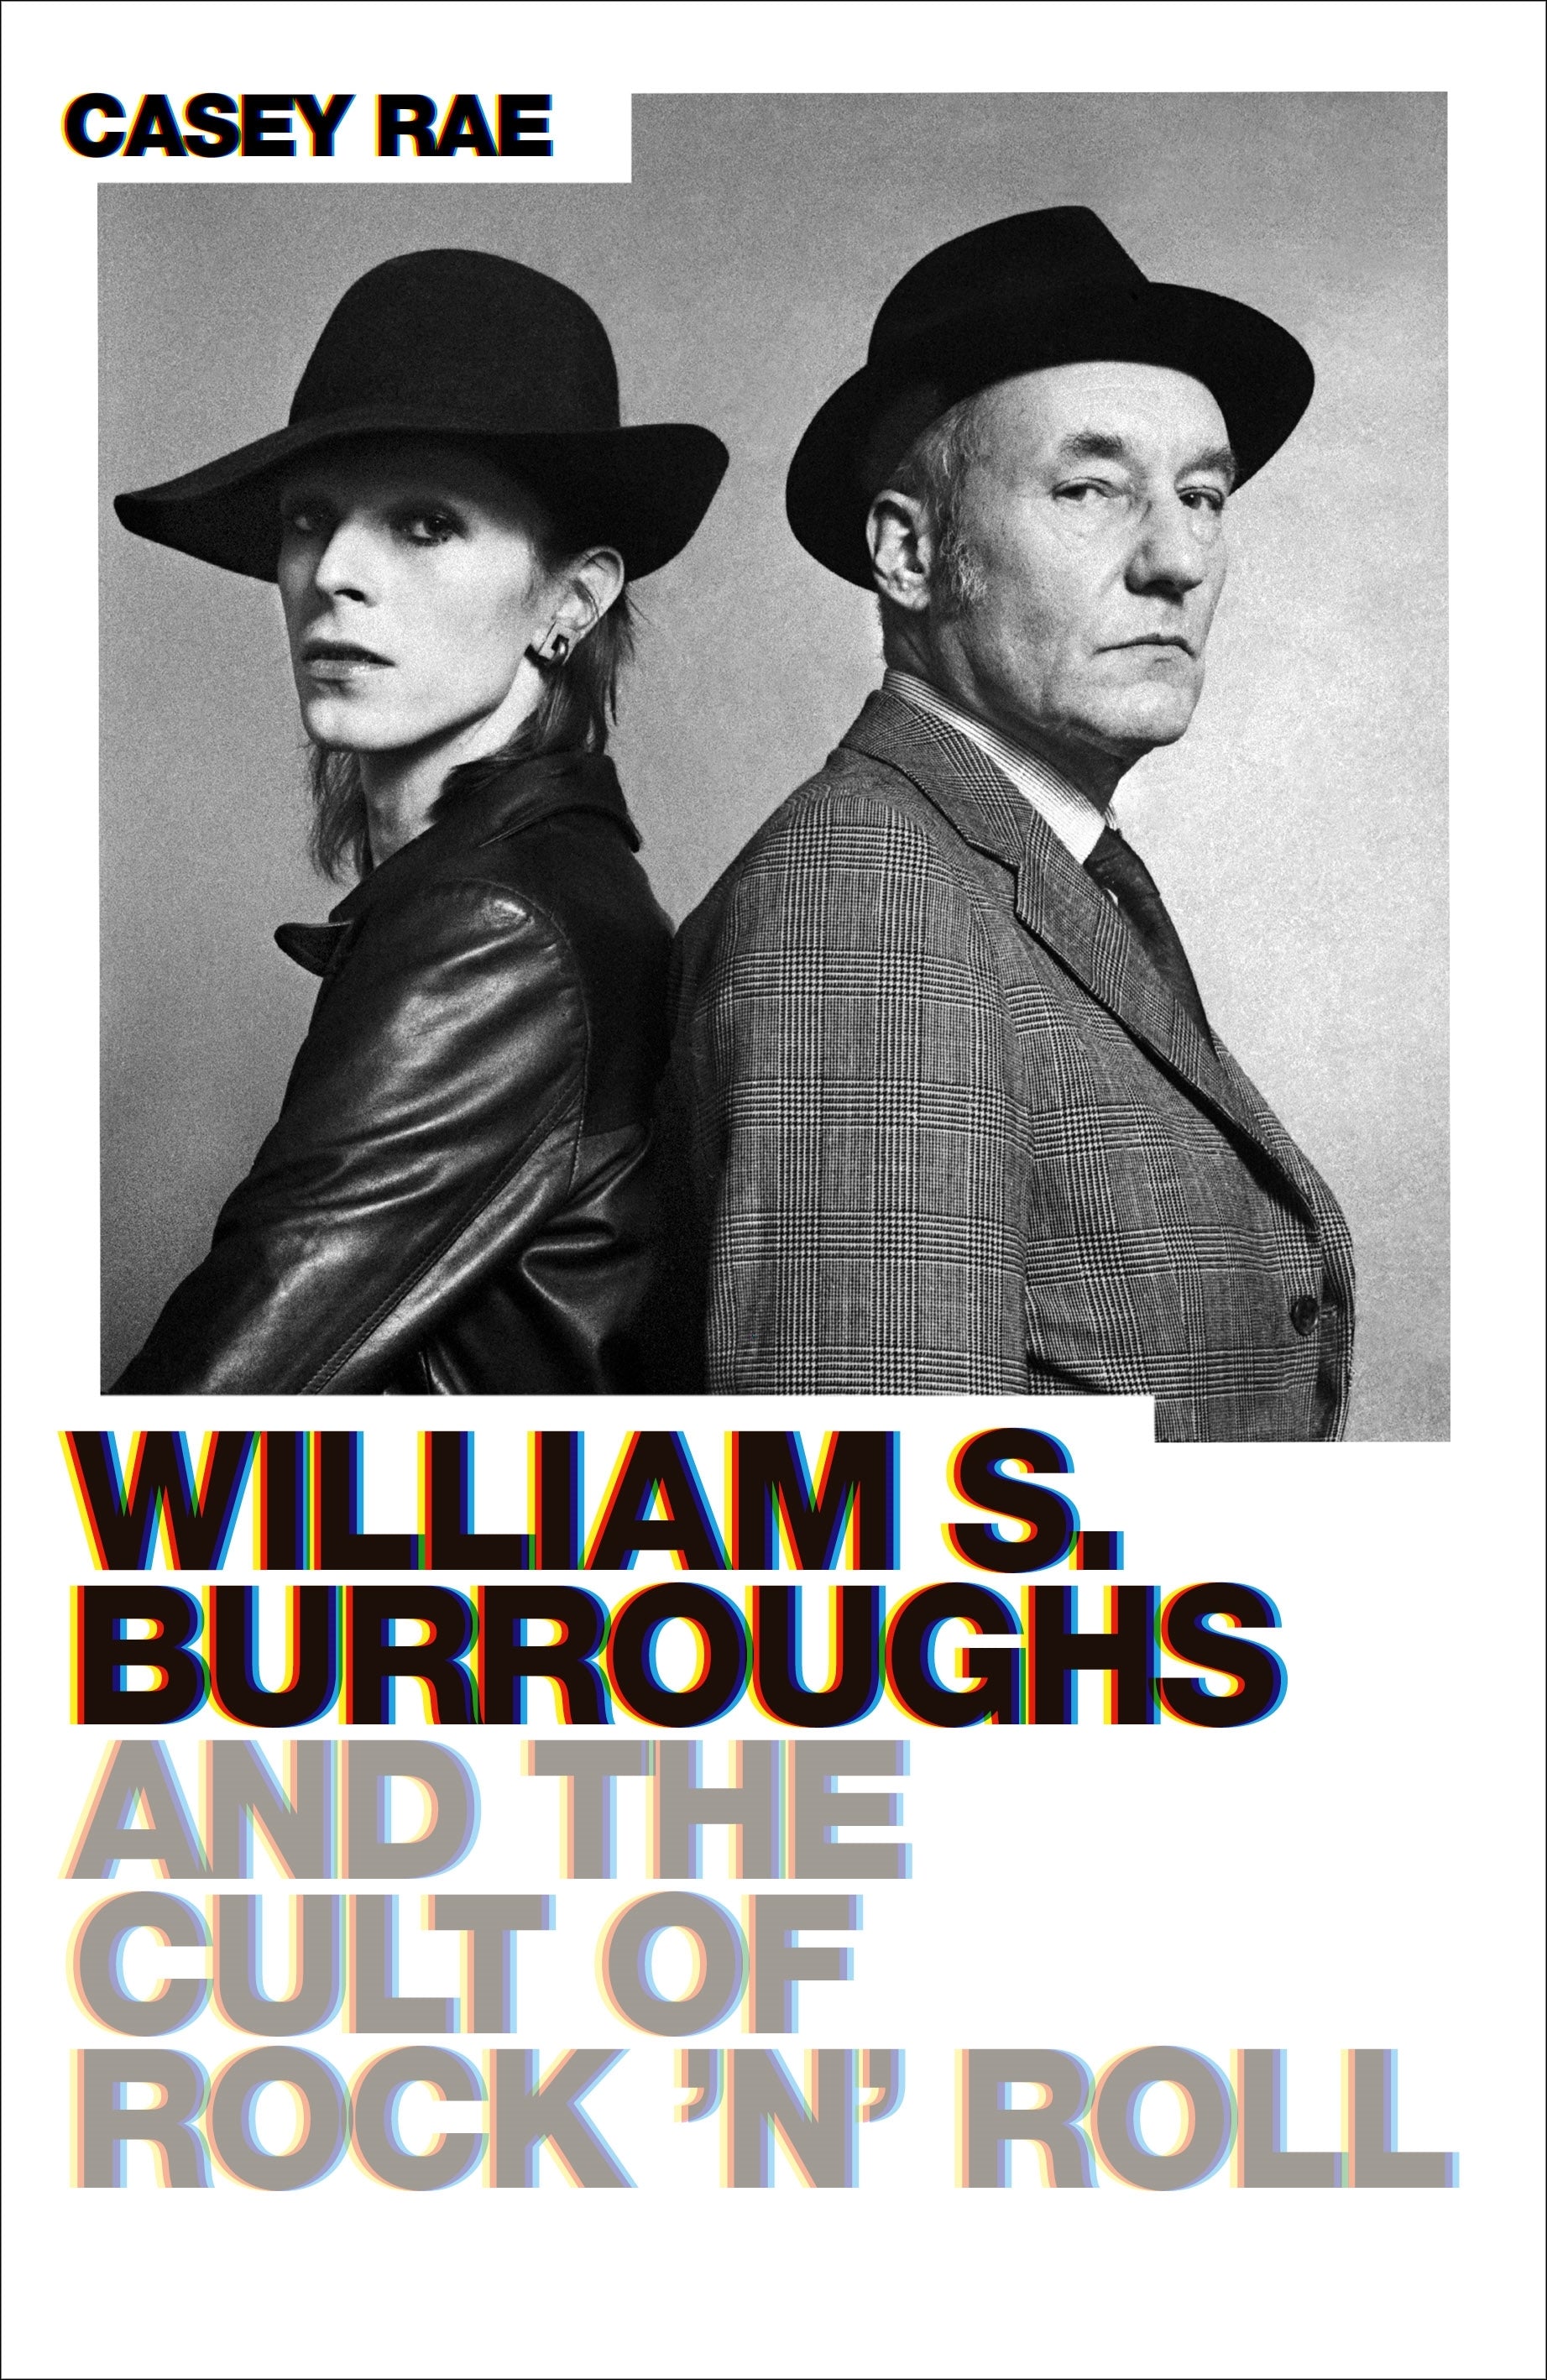 William S. Burroughs and the Cult of Rock 'n' Roll by Casey Rae